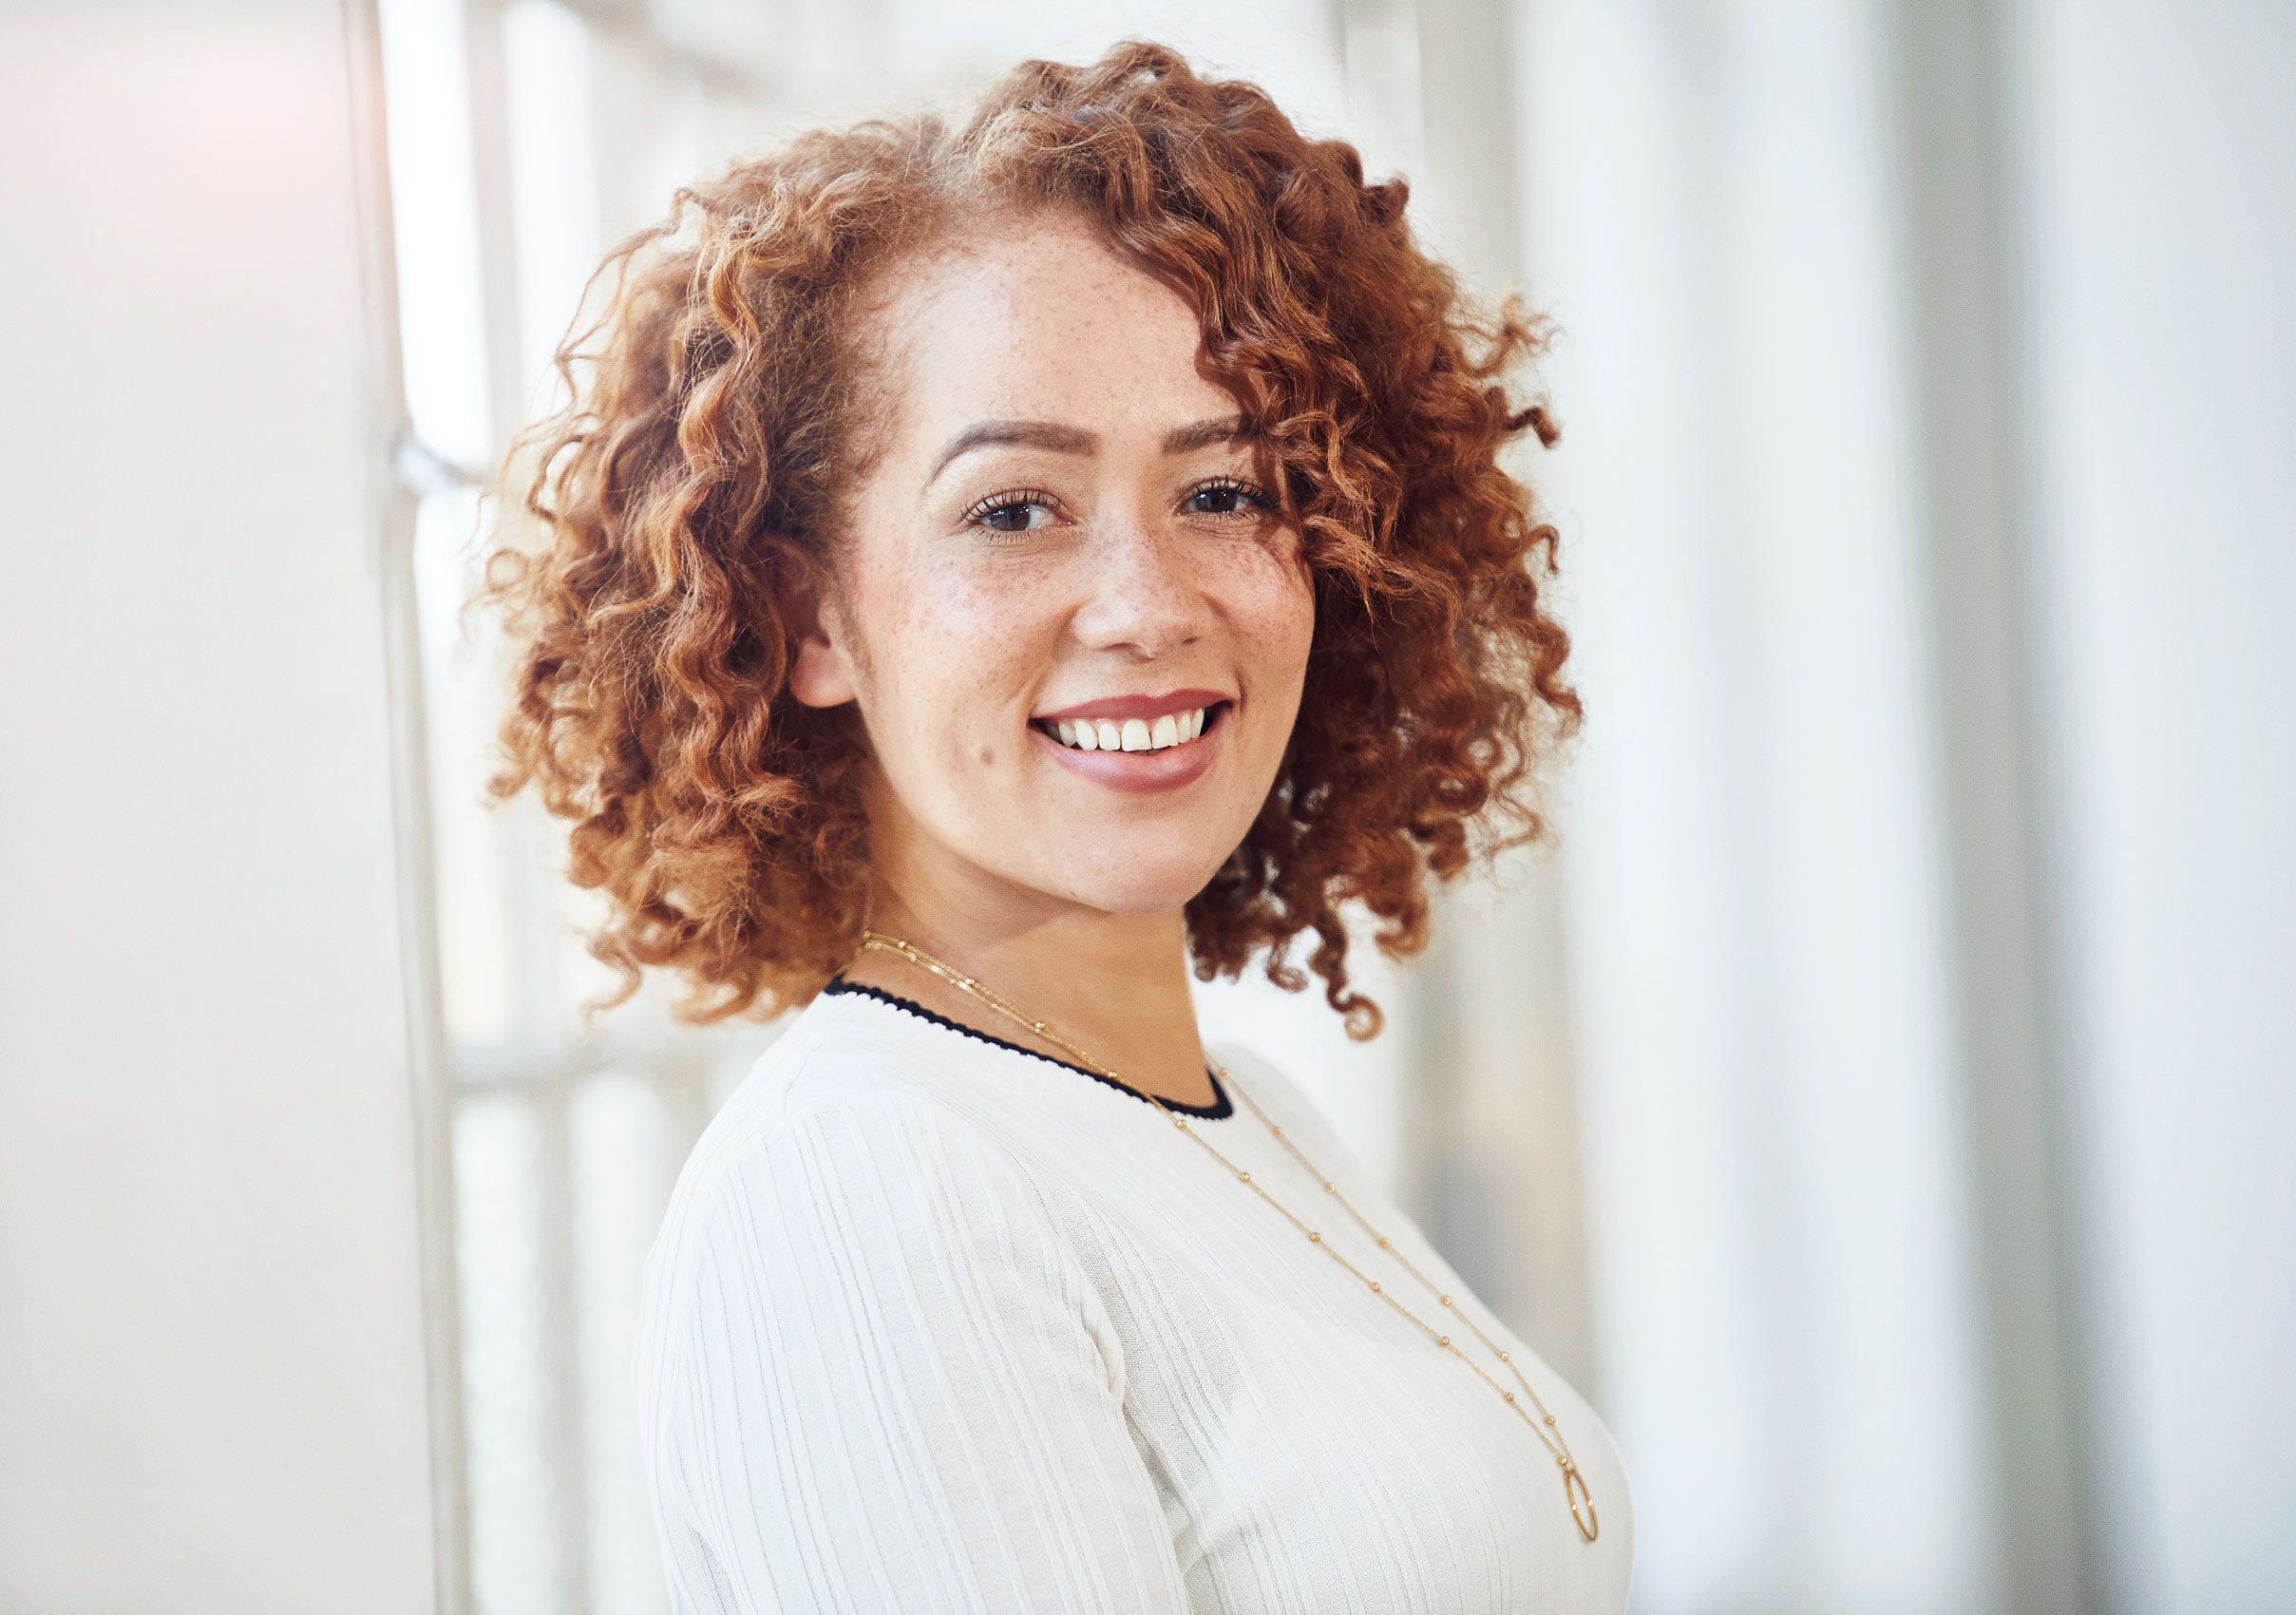 Corporate Portraits - Woman with curly hair standing by office windows smiling - shot for adverting and marketing based company.  London